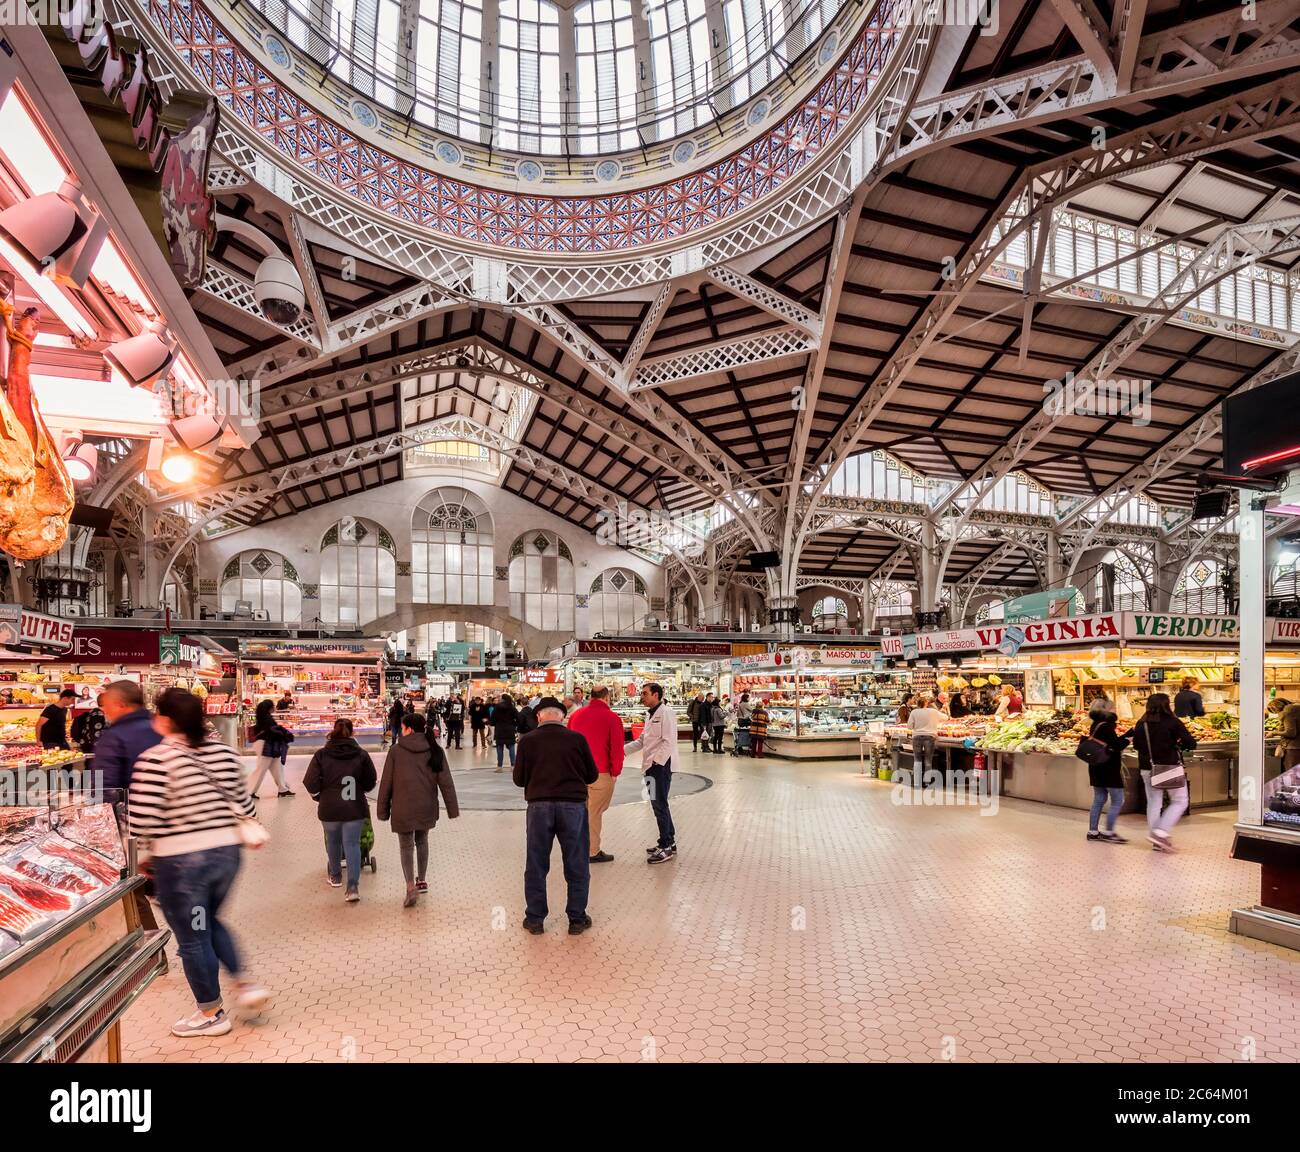 3 March 2020: Valencia, Spain - Shoppers in the Central Market, Valencia. Some motion blur on moving people. Stock Photo